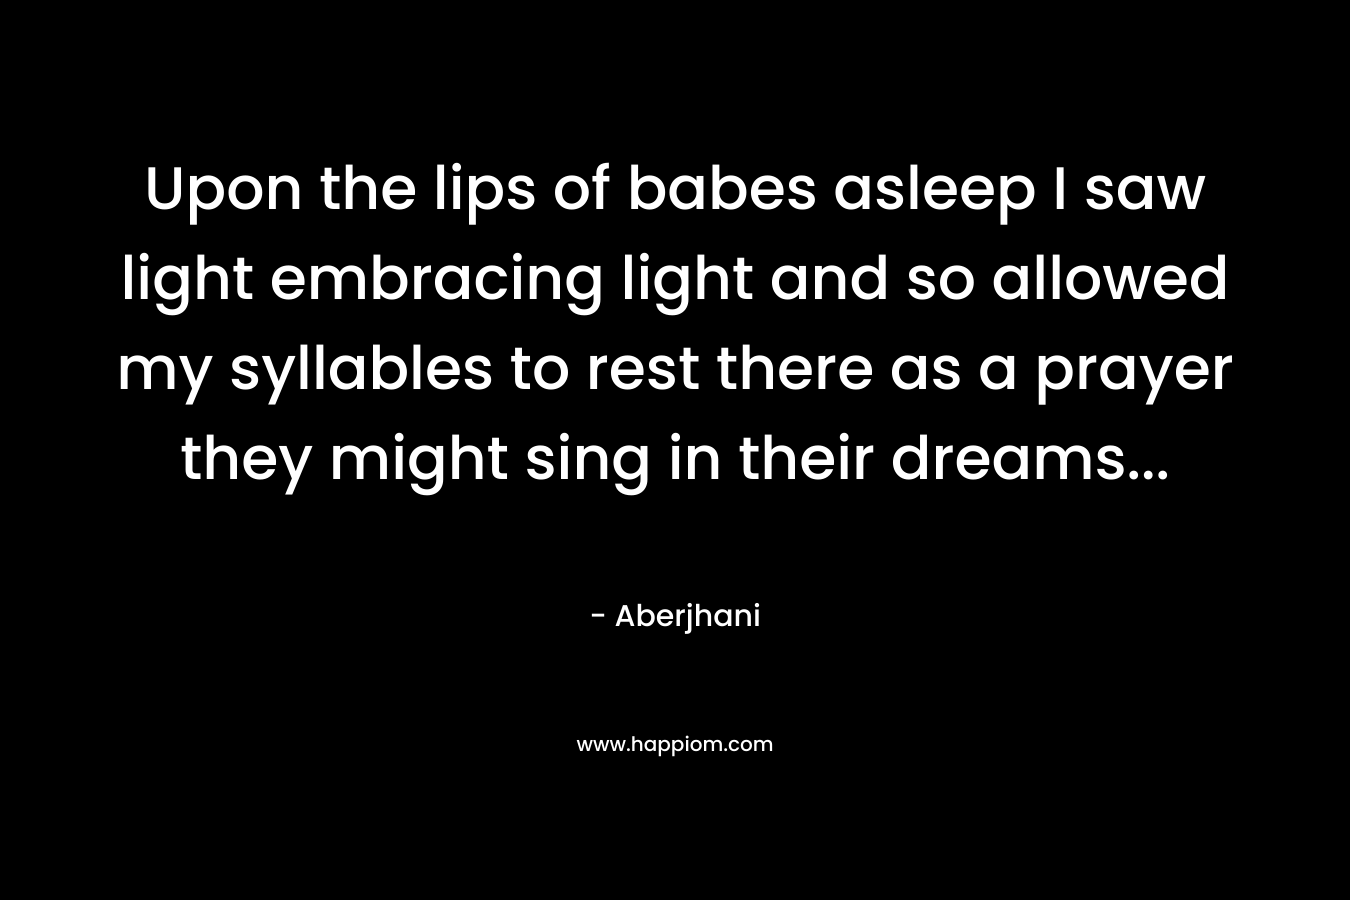 Upon the lips of babes asleep I saw light embracing light and so allowed my syllables to rest there as a prayer they might sing in their dreams… – Aberjhani